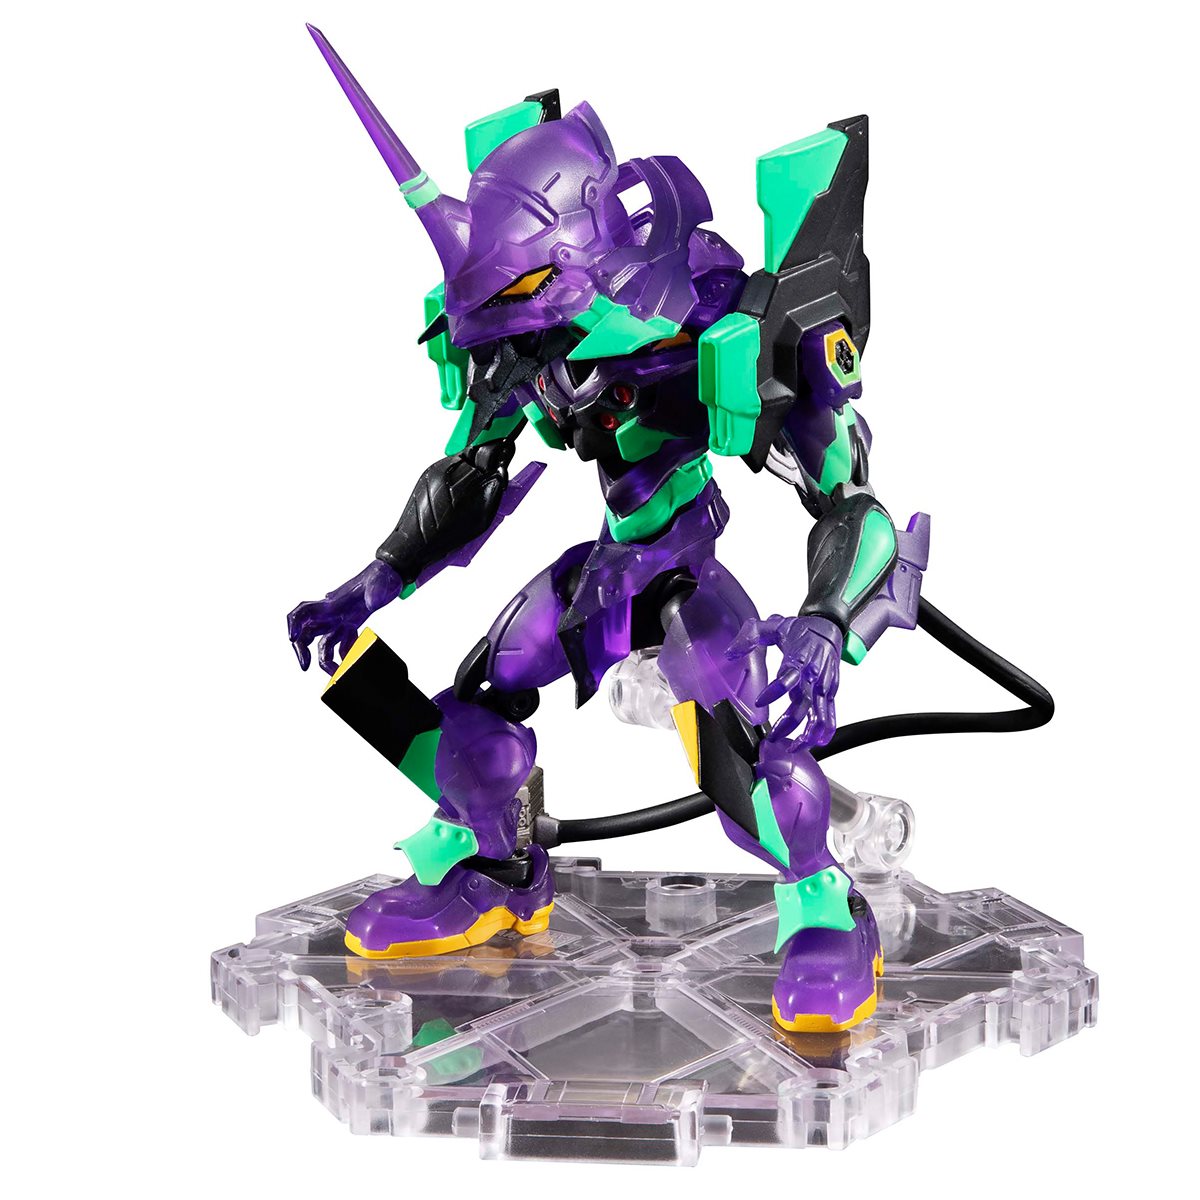 Bandai Hobby Evangelion 1.0 You are Not Alone Model Evangelion-01 Test  Type Action Figure, 150533